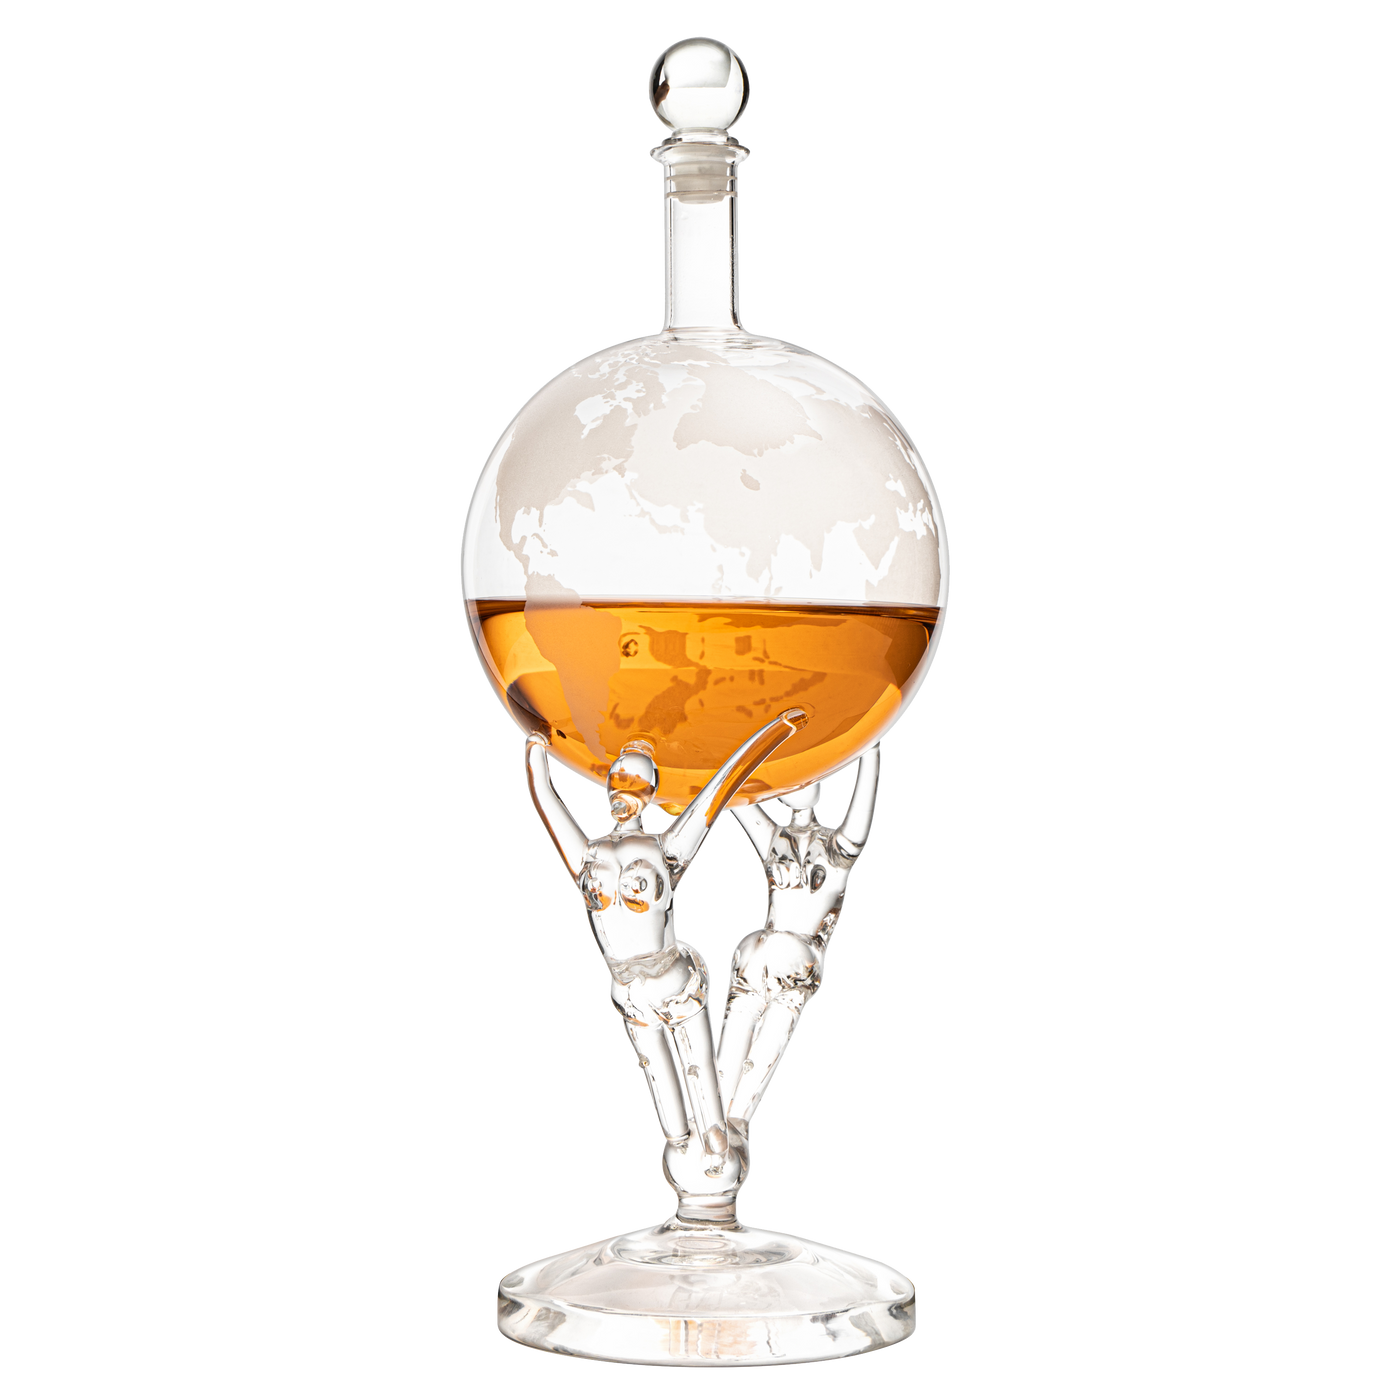 Love Crystal Decanter, For Wine & Whiskey Liquor Lux - 12" Tall - Spirits, Whiskey, Scotch, Bourbon, Cognac and Brandy - 500mL - By Liquor Lux - Lovers Globe Spouse, Partner Gifts